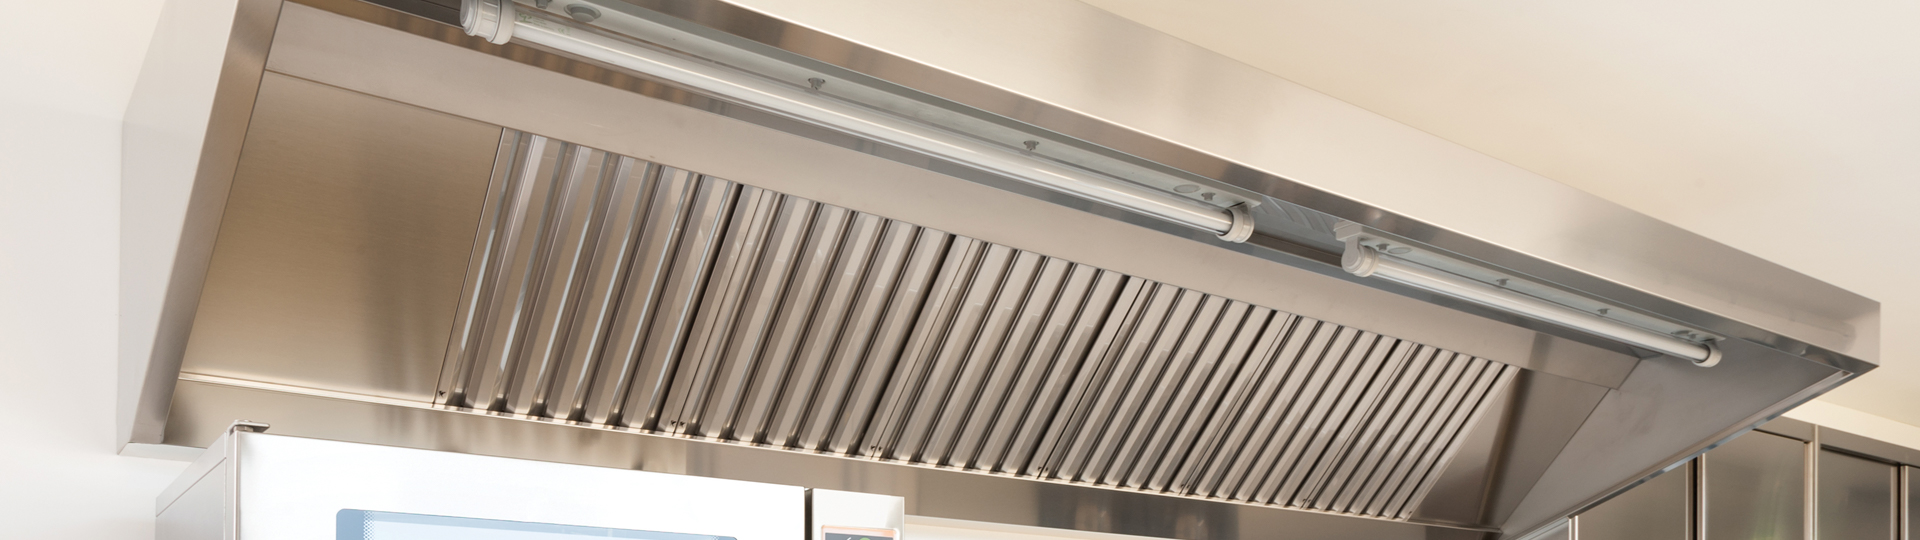 Kitchen Extract & Supply Ductwork